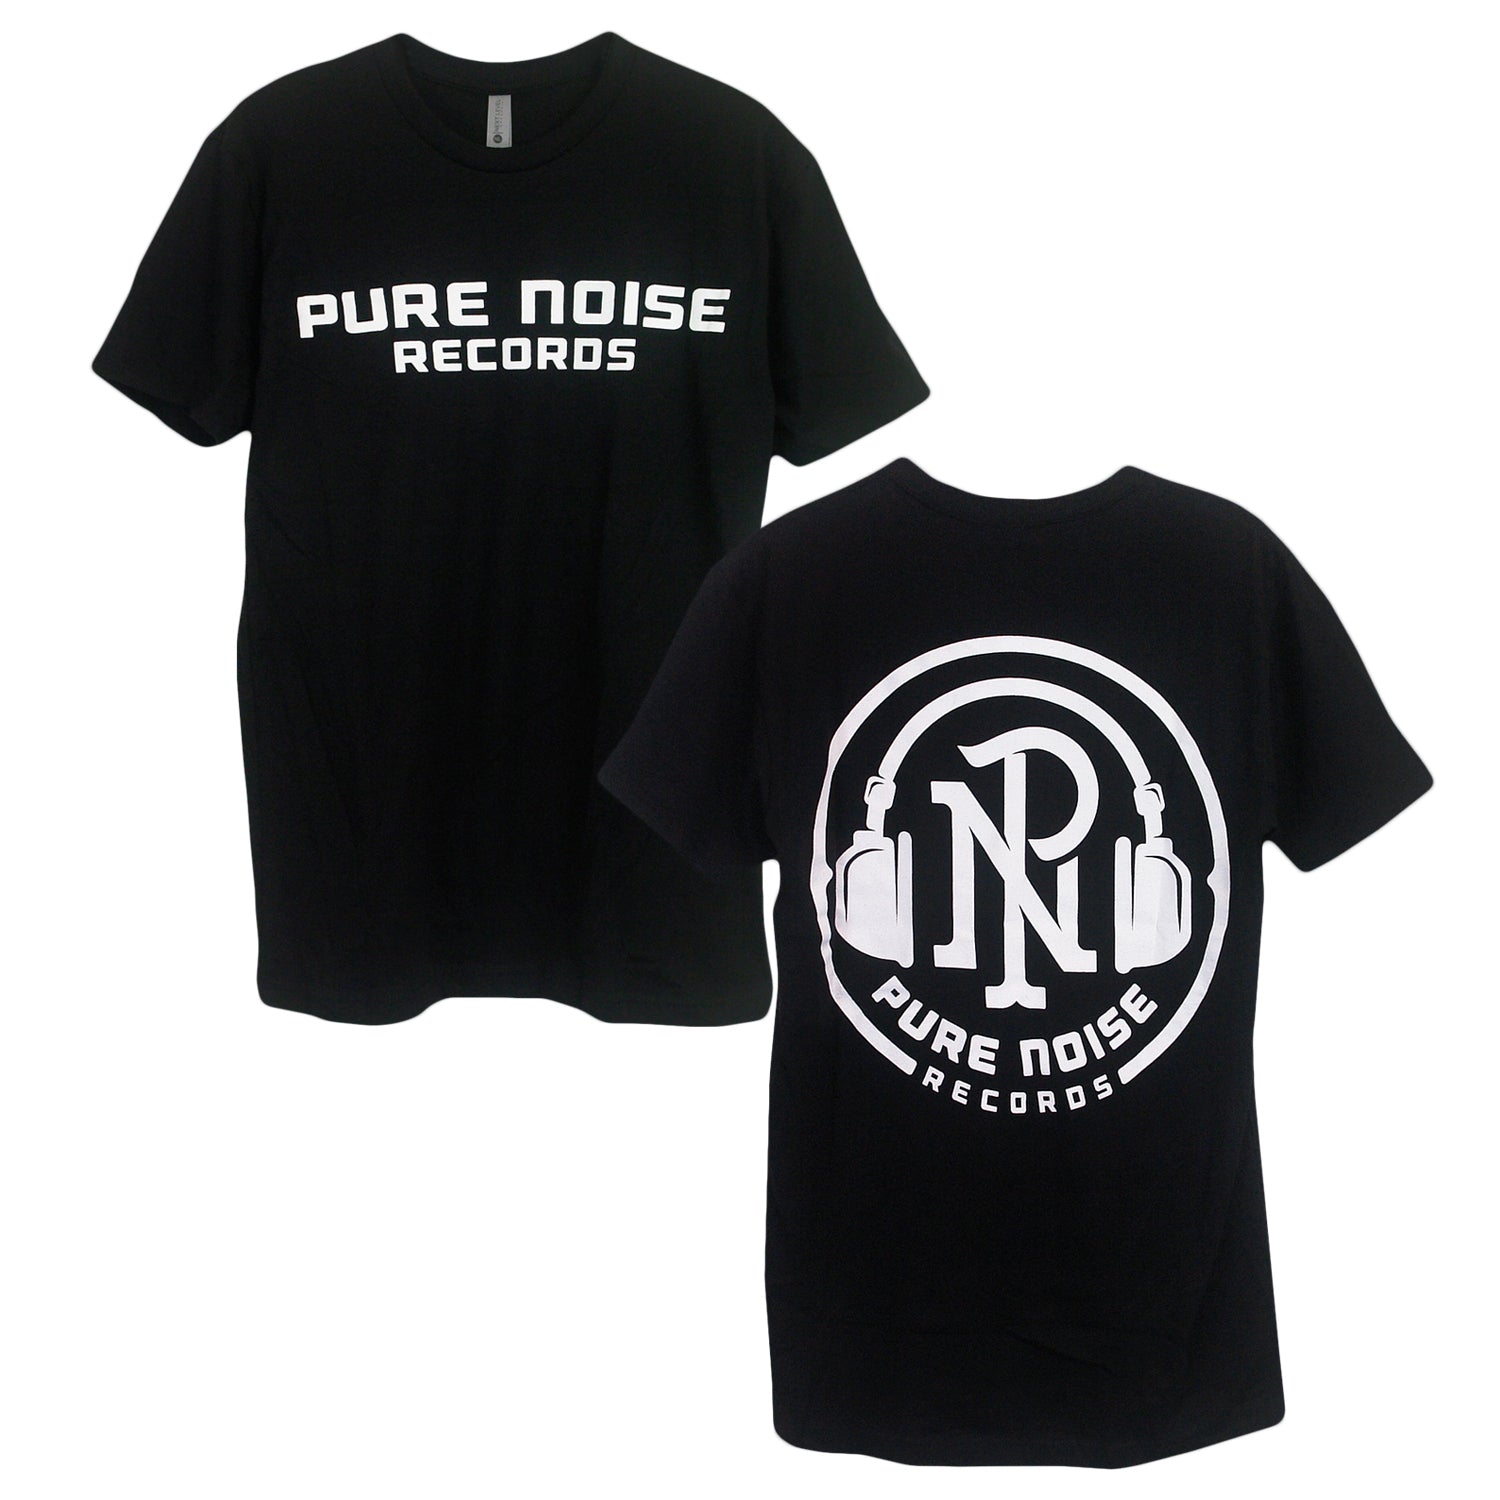 Masked Intruder - Pure Noise Records